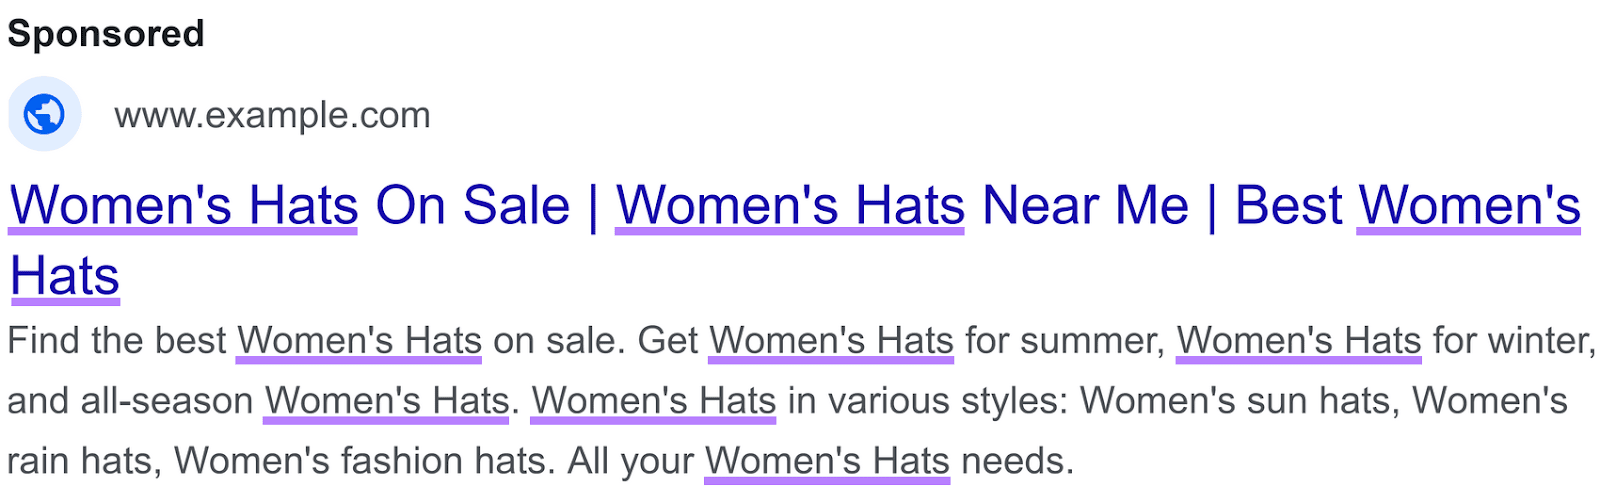 A PPC advertisement  mockup for "women's hats" showing keyword stuffing